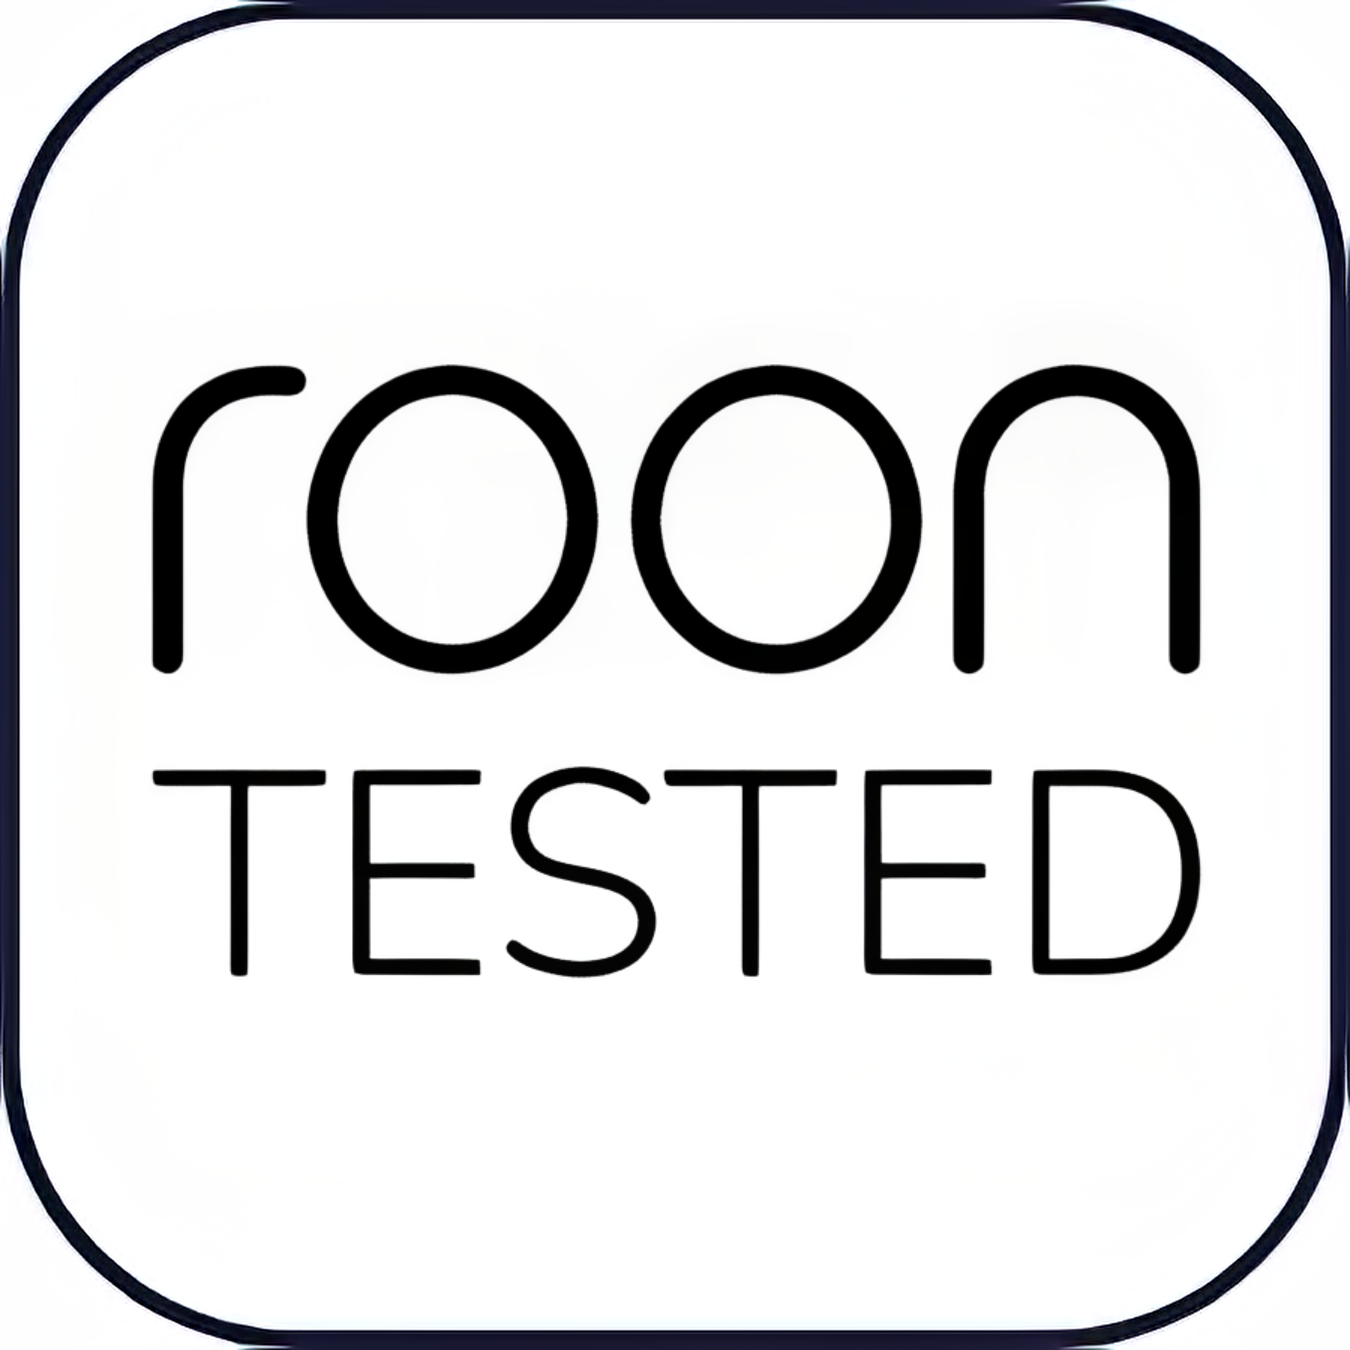 roon tested-topaz